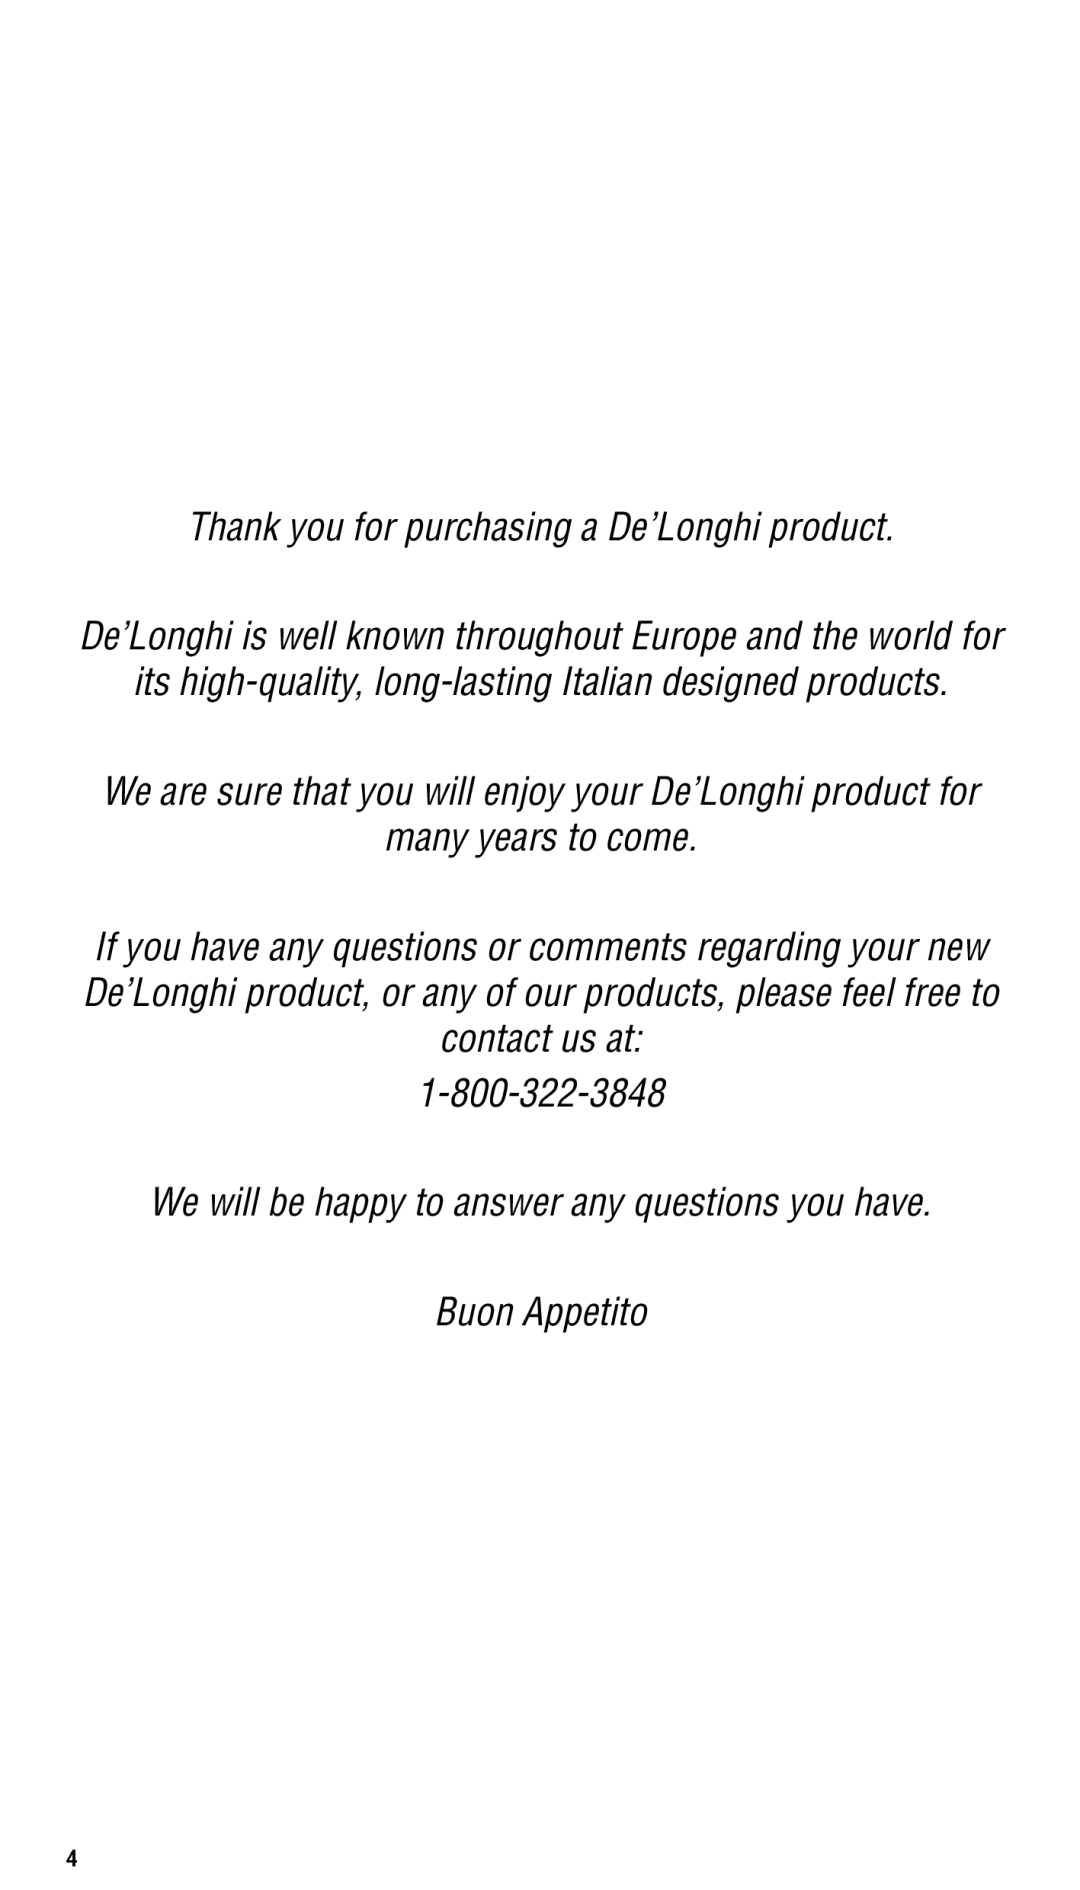 DeLonghi CGH800 Thank you for purchasing a De’Longhi product, De’Longhi is well known throughout Europe and the world for 